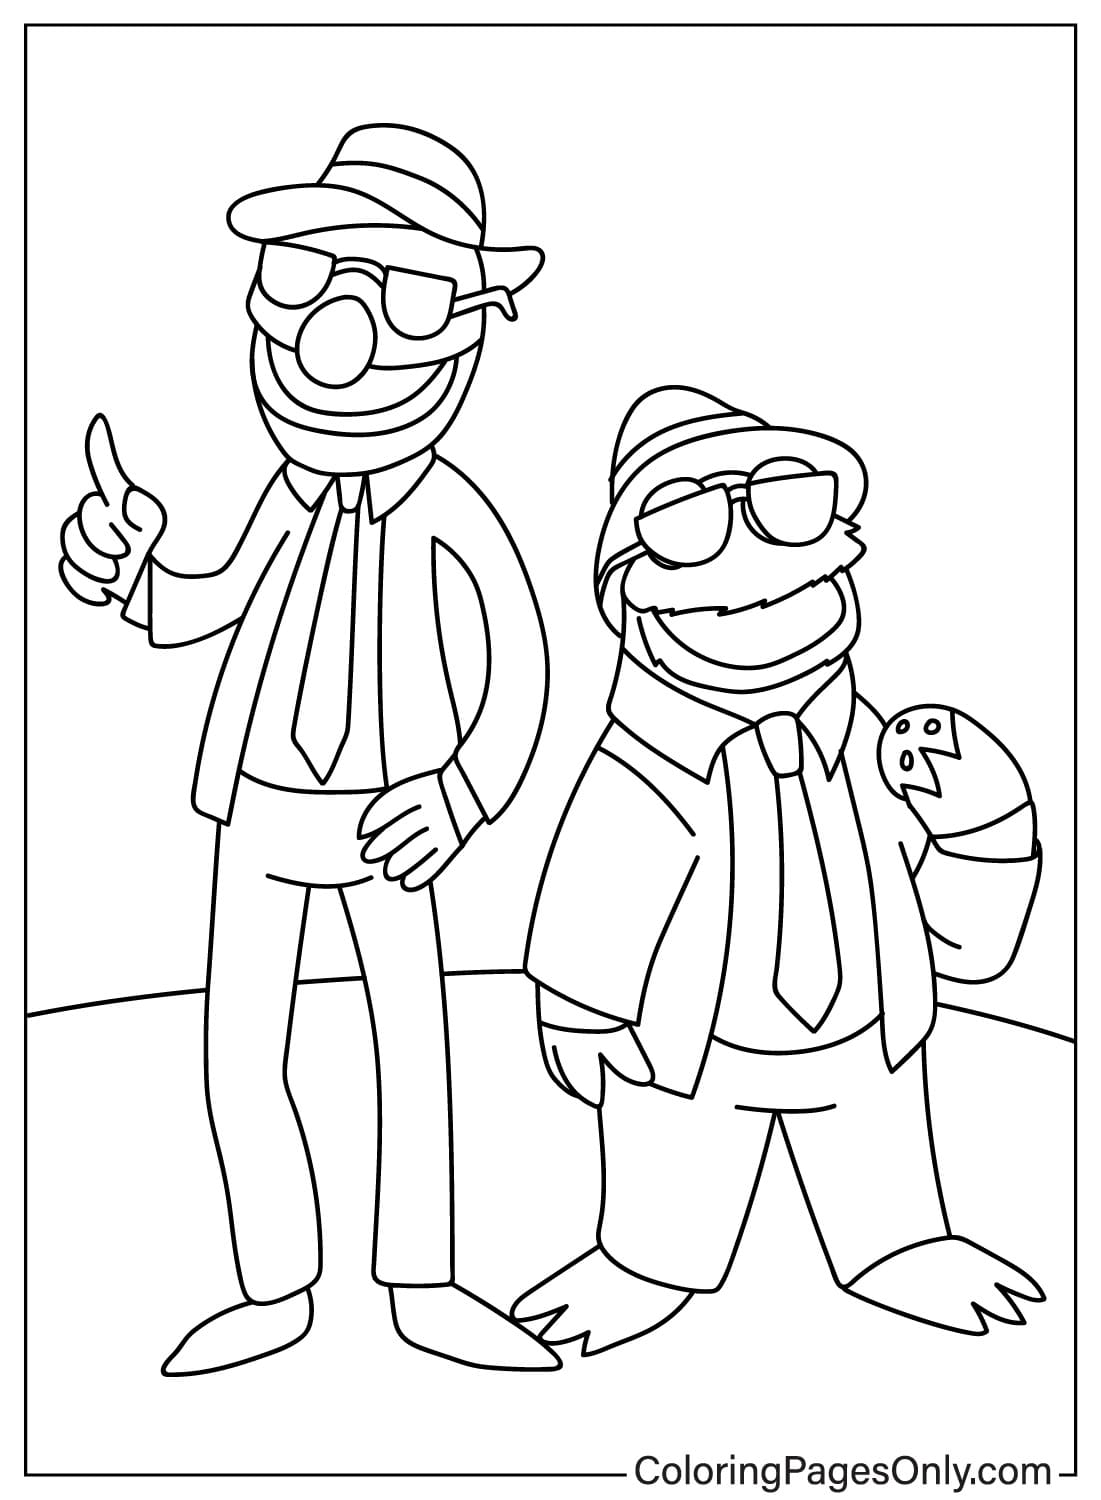 Grover and Cookie Monster Coloring Page